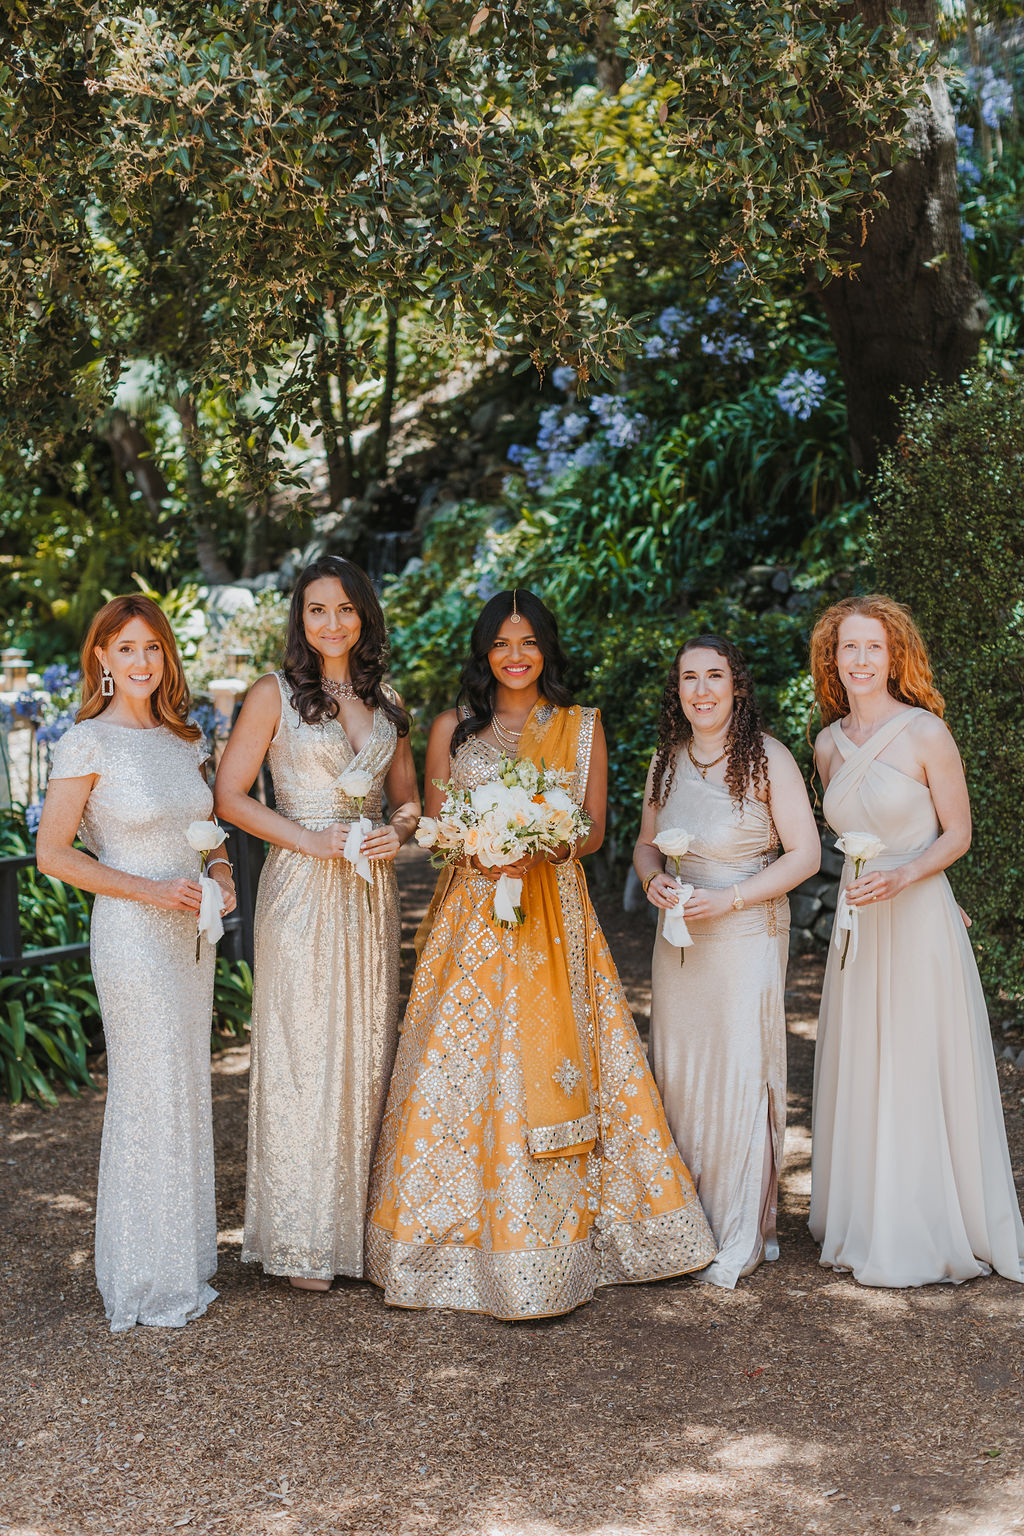 bride in orange marigold colored wedding sari holds bouquet of white and orange flowers during portraits with bridesmaids in mix matched gold and beige bridesmaid dresses